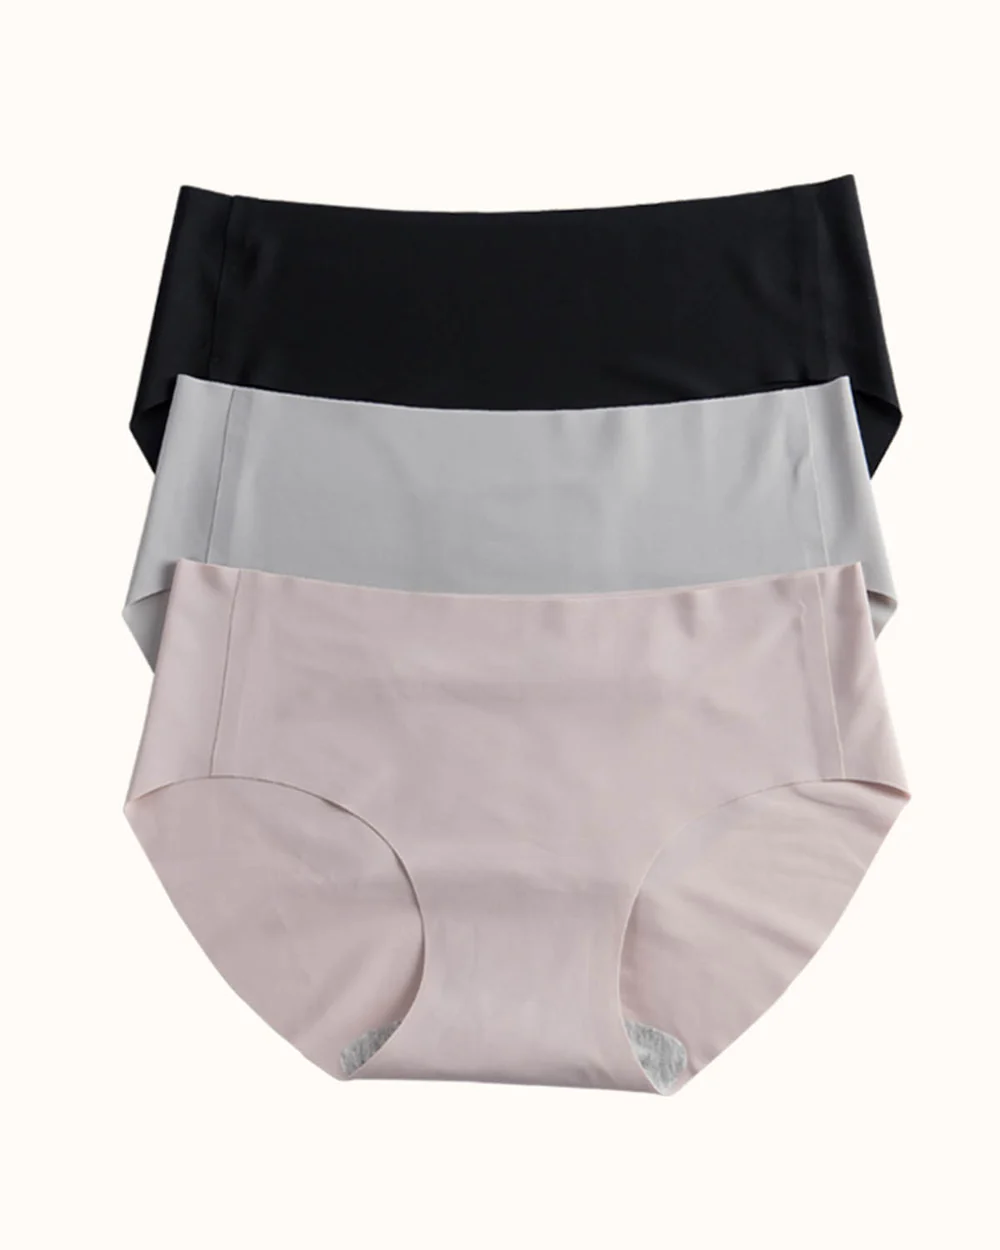 Style 1862 Invisible Seamless Panties Whole Carton ( 230 Pcs of Each Color Pink/Grey/Black, 690Pcs in Total)